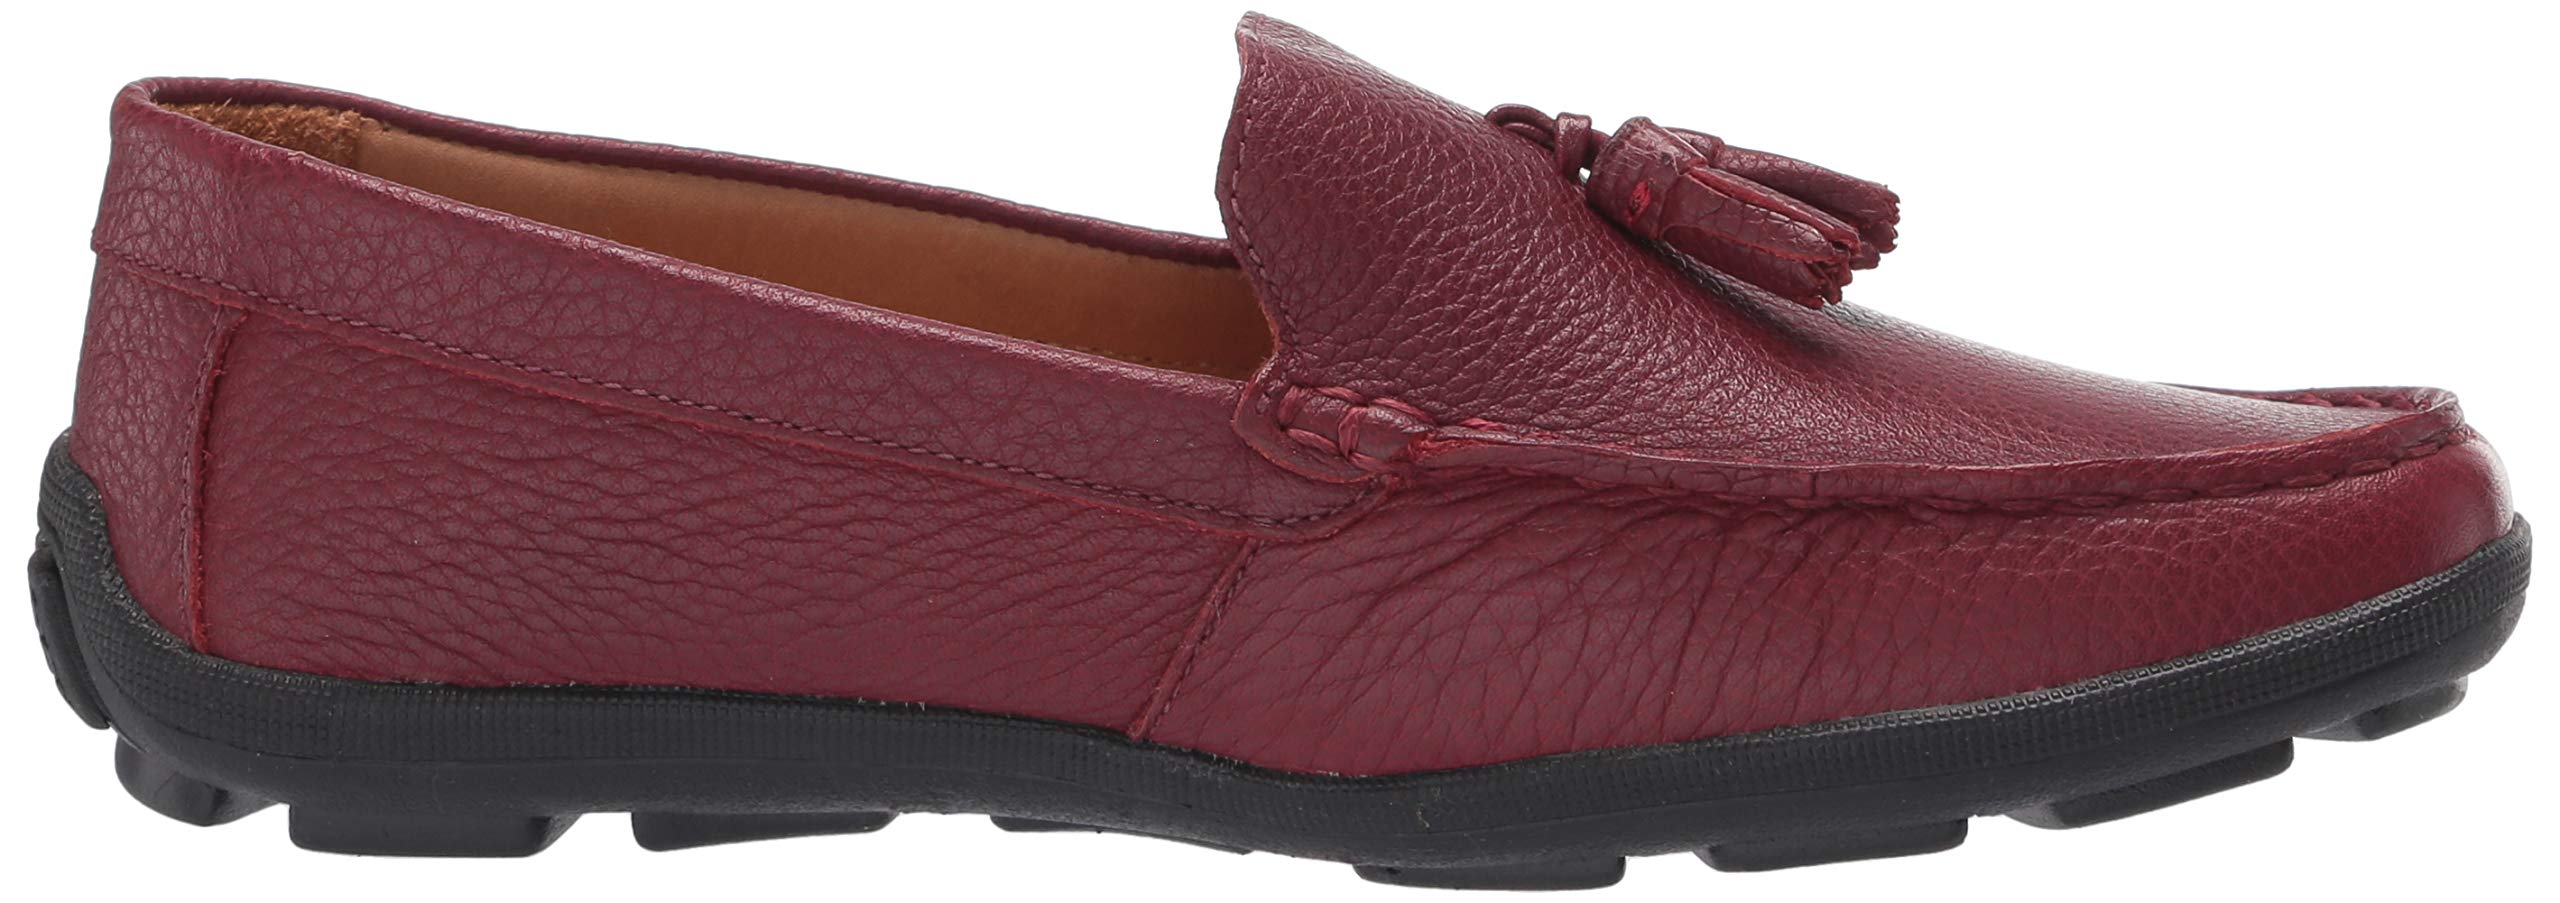 Driver Club USA Unisex-Child Kids Boys/Girls Leather Driving Loafer with Tassle Detail